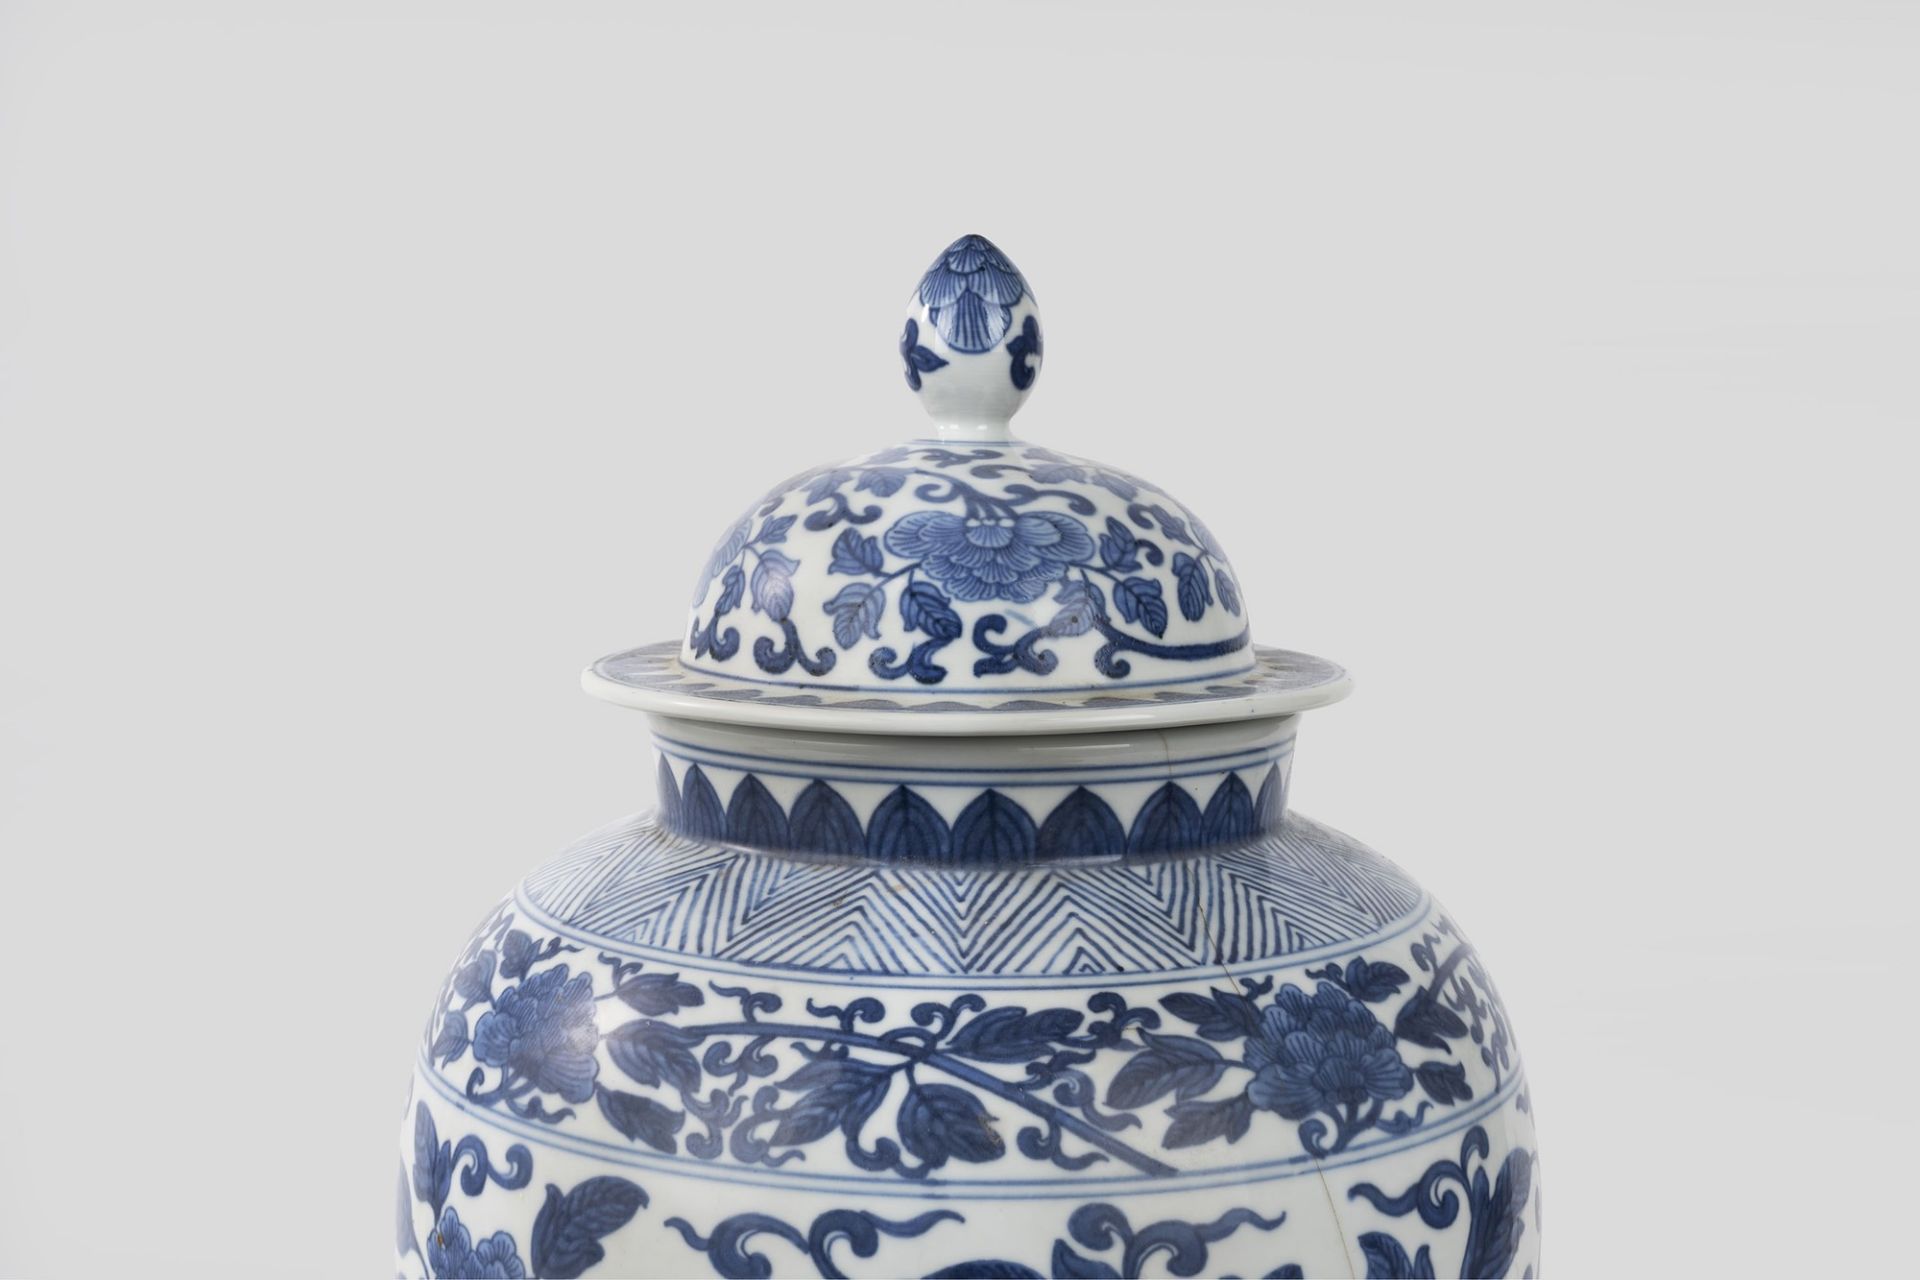 Blue and white porcelain vase with lid, China, 20th century - Image 3 of 3